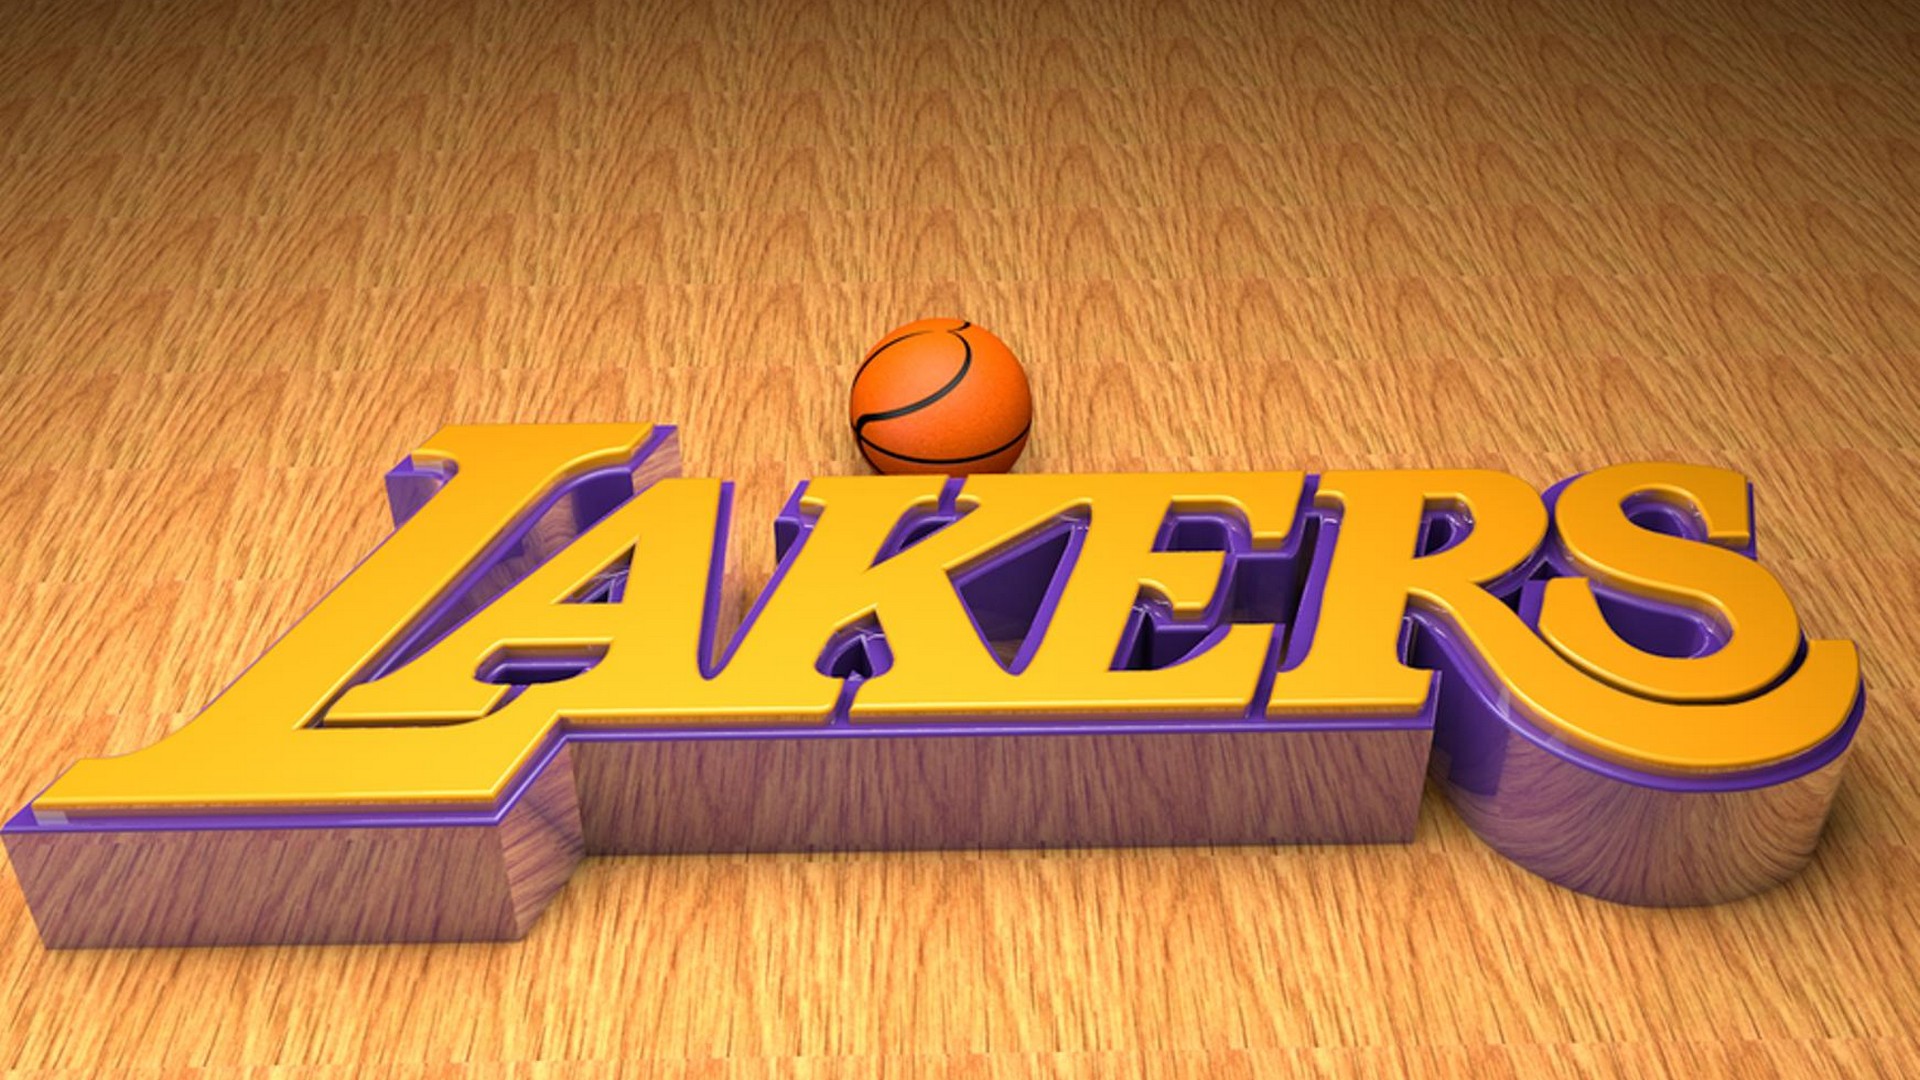 HD Los Angeles Lakers Wallpapers with image dimensions 1920x1080 pixel. You can make this wallpaper for your Desktop Computer Backgrounds, Windows or Mac Screensavers, iPhone Lock screen, Tablet or Android and another Mobile Phone device